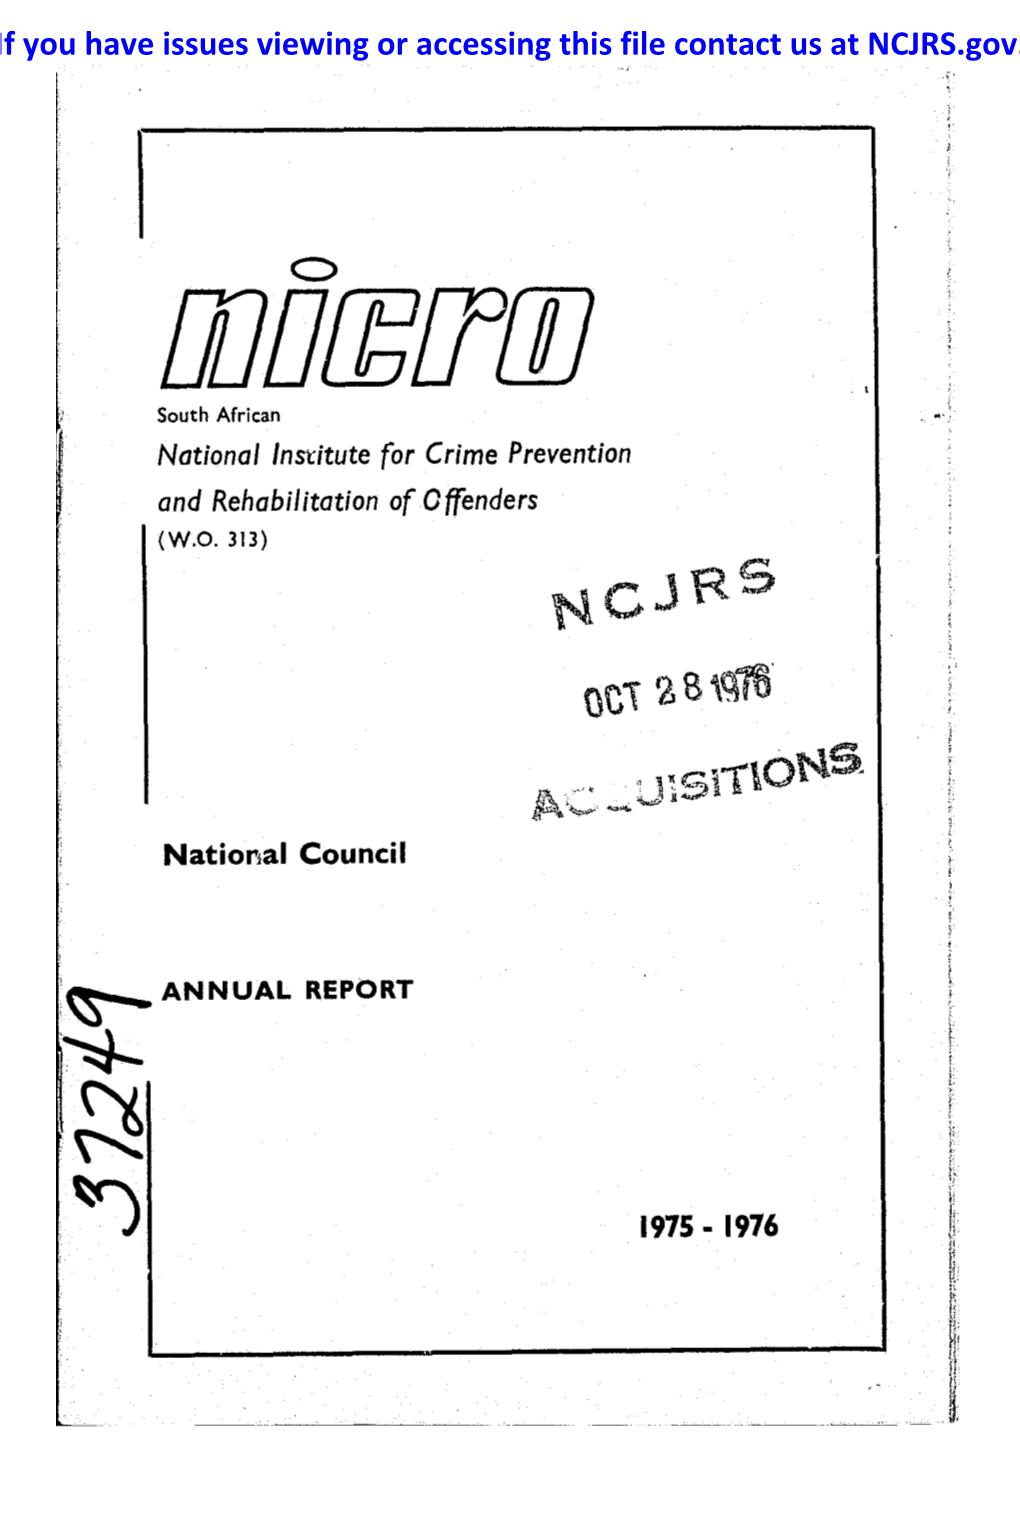 NICRO and REHABILITATION of OFFENDERS (Registered Under the Welfare Organisations Act: No